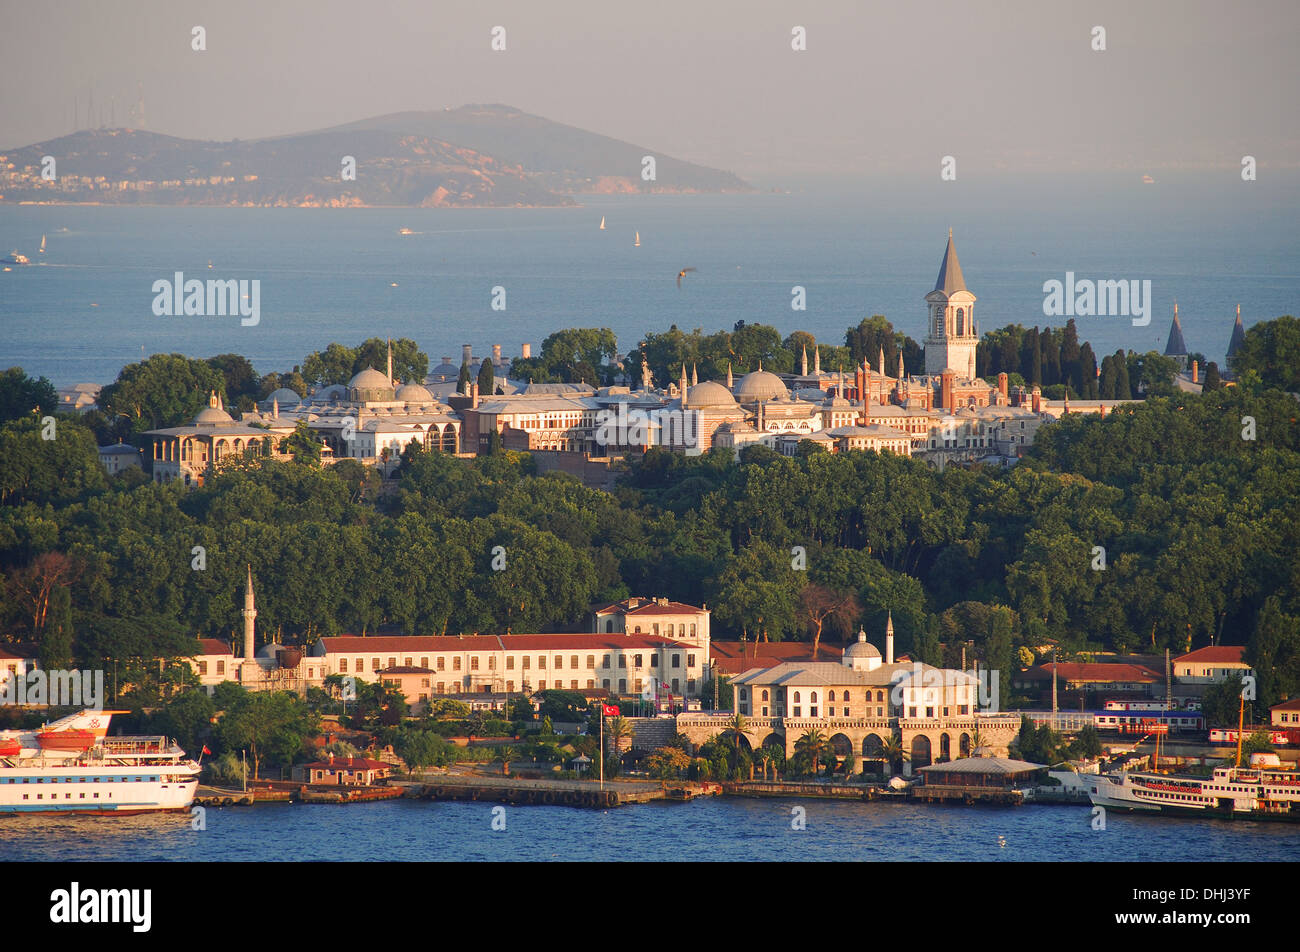 ISTANBUL, TURKEY. An elevated view of Topkapi Palace and Gulhane Park. Stock Photo